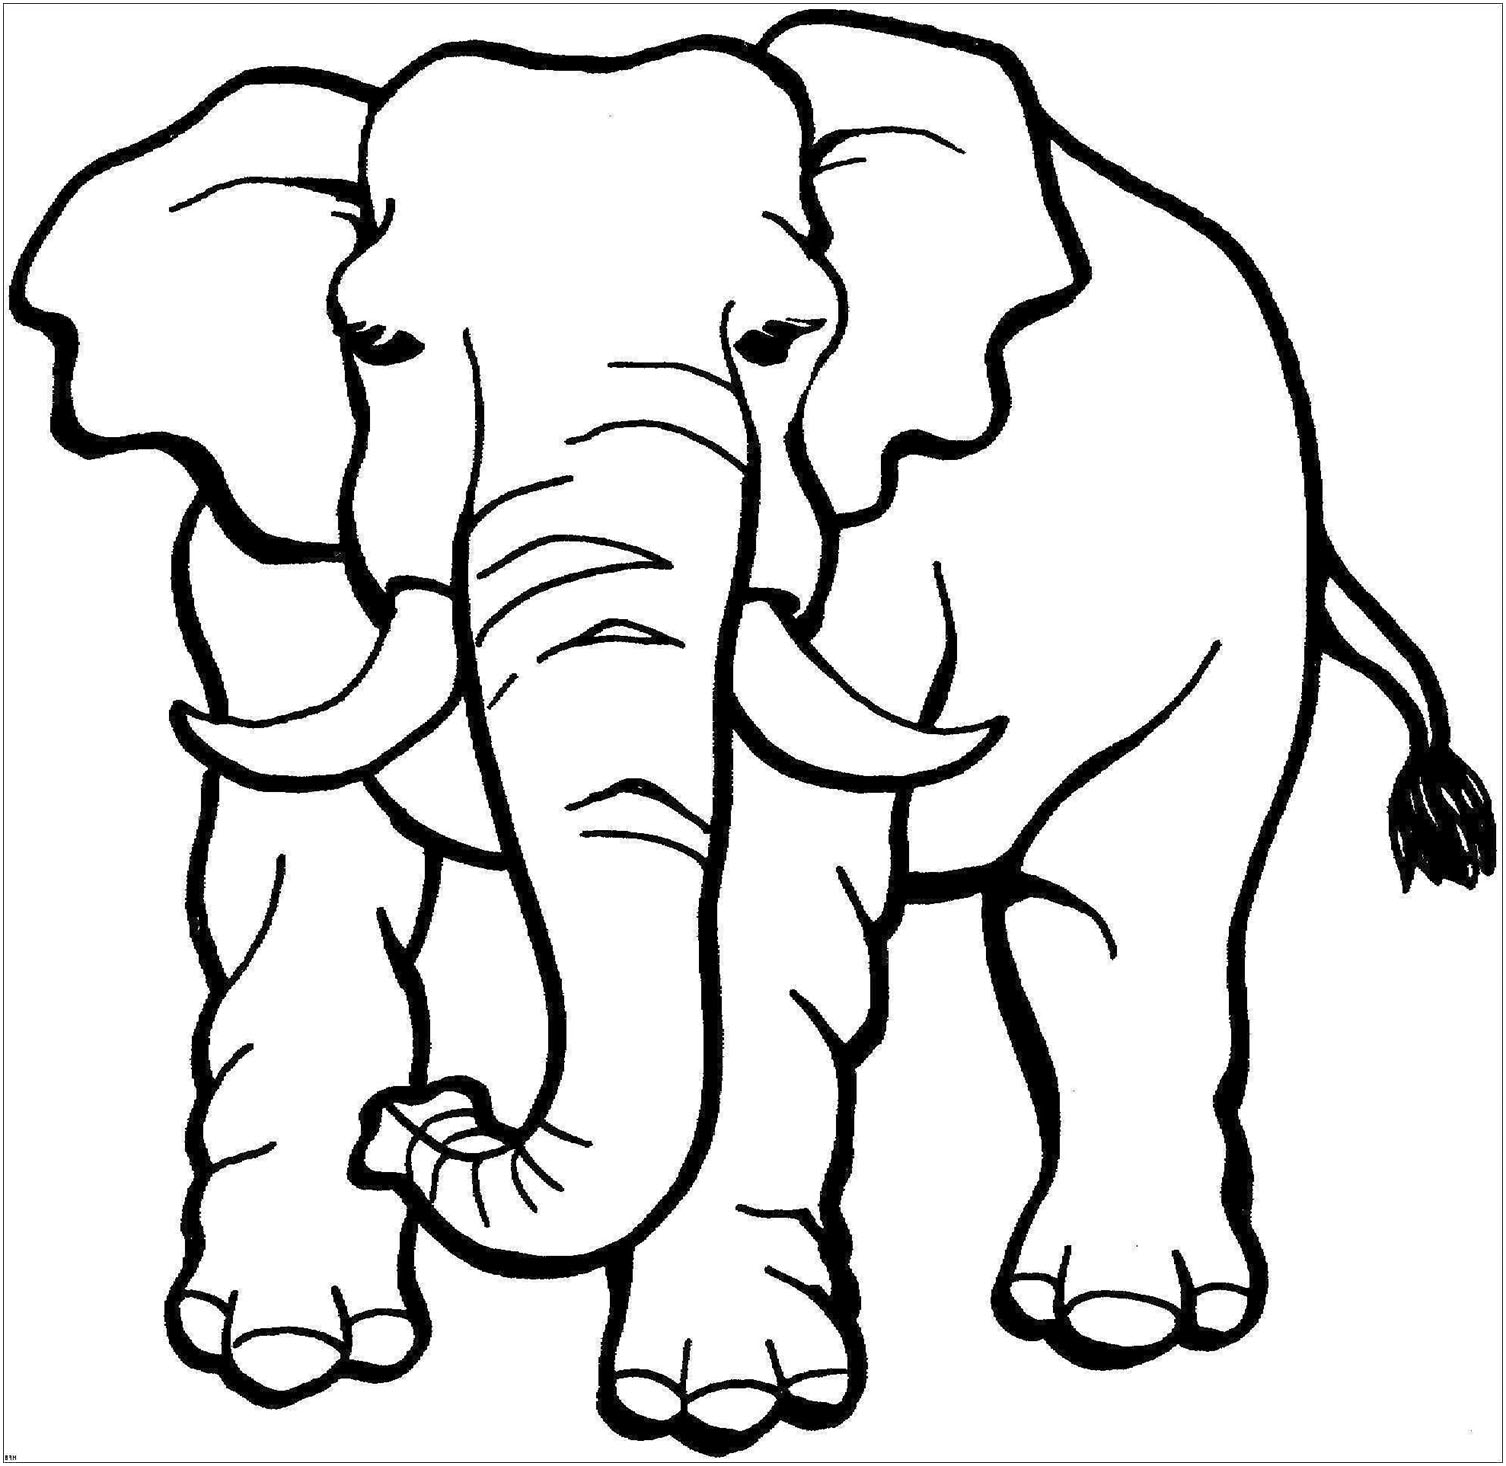 Elephants to print for free - Elephants Kids Coloring Pages